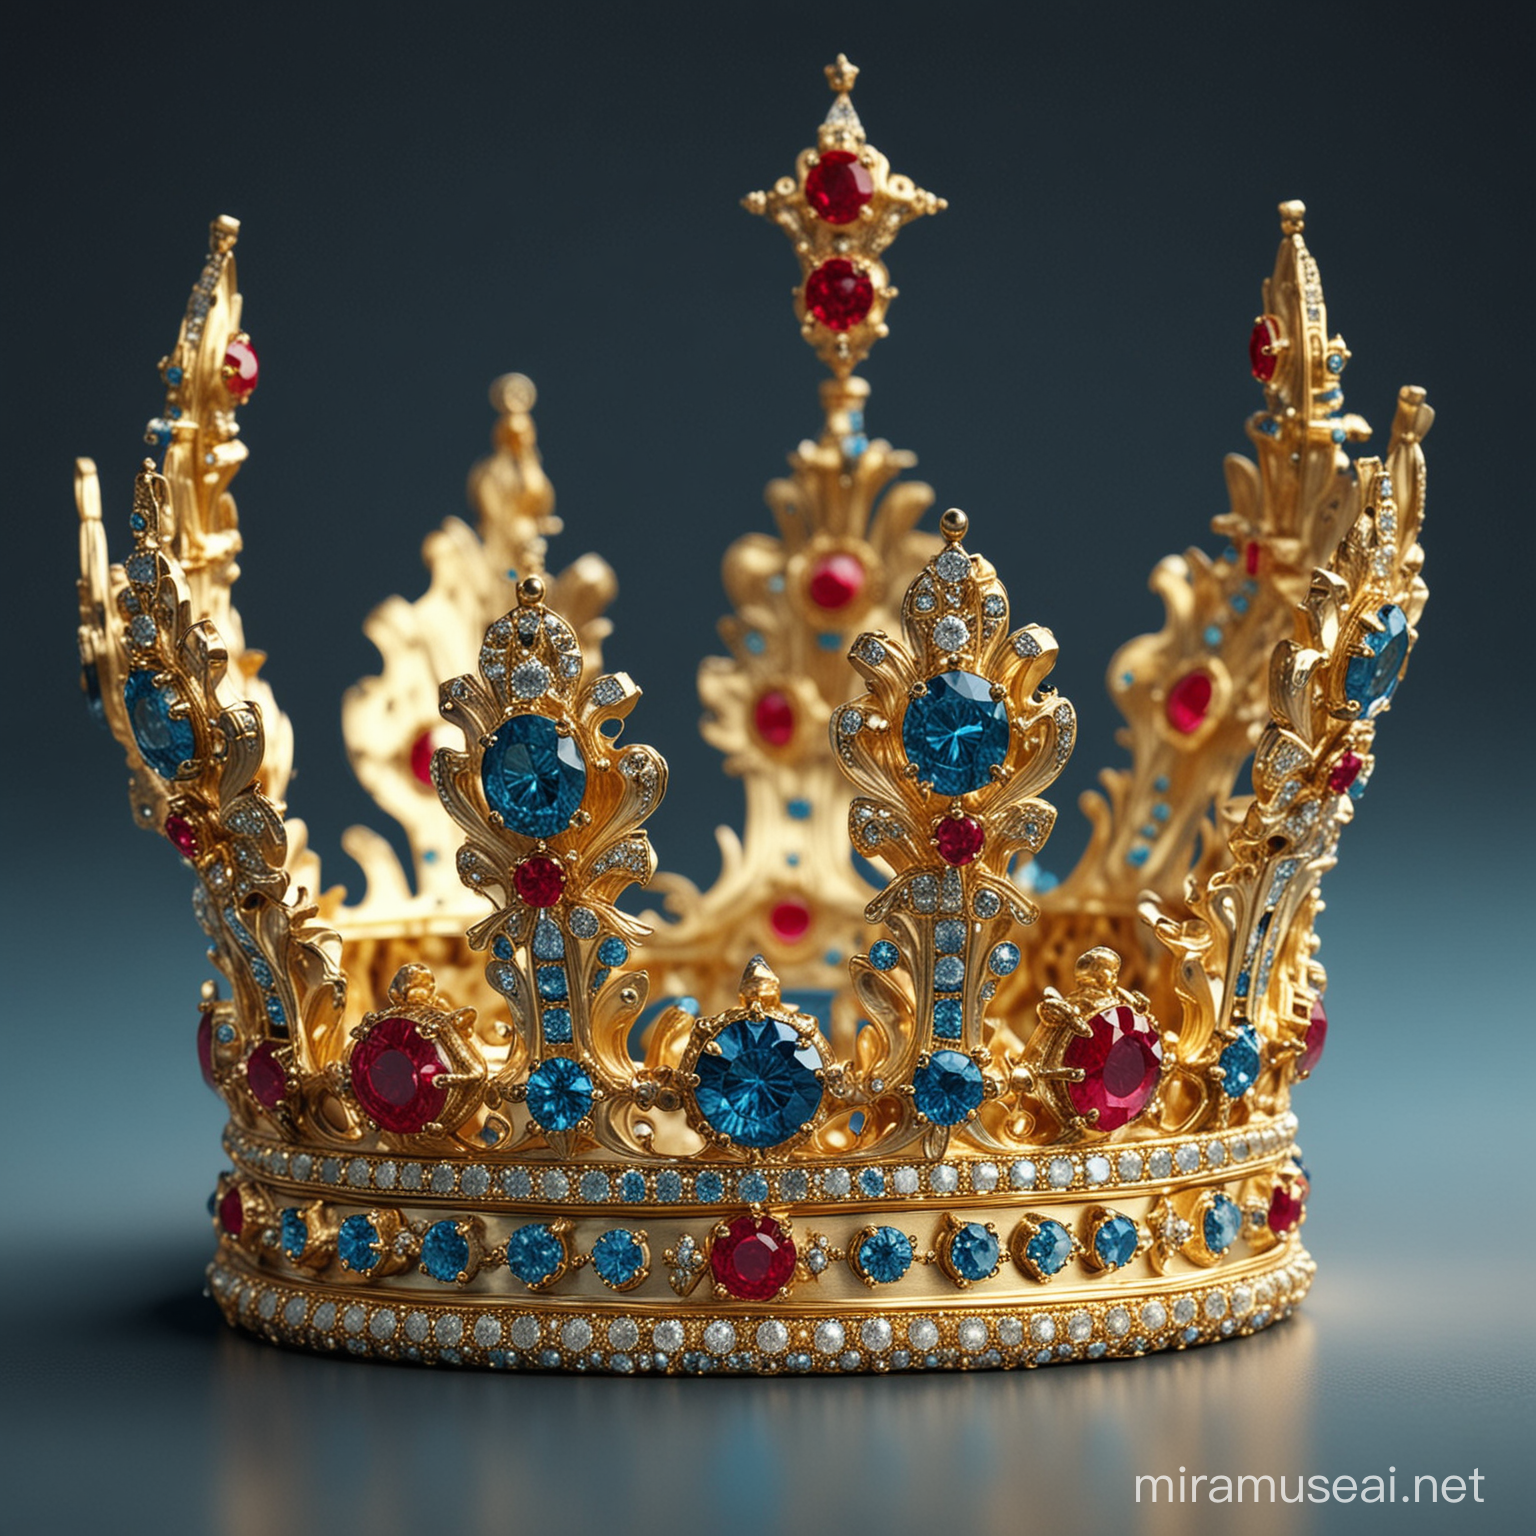 Beautiful kings crown made of gold, Ruby and blue diamonds 